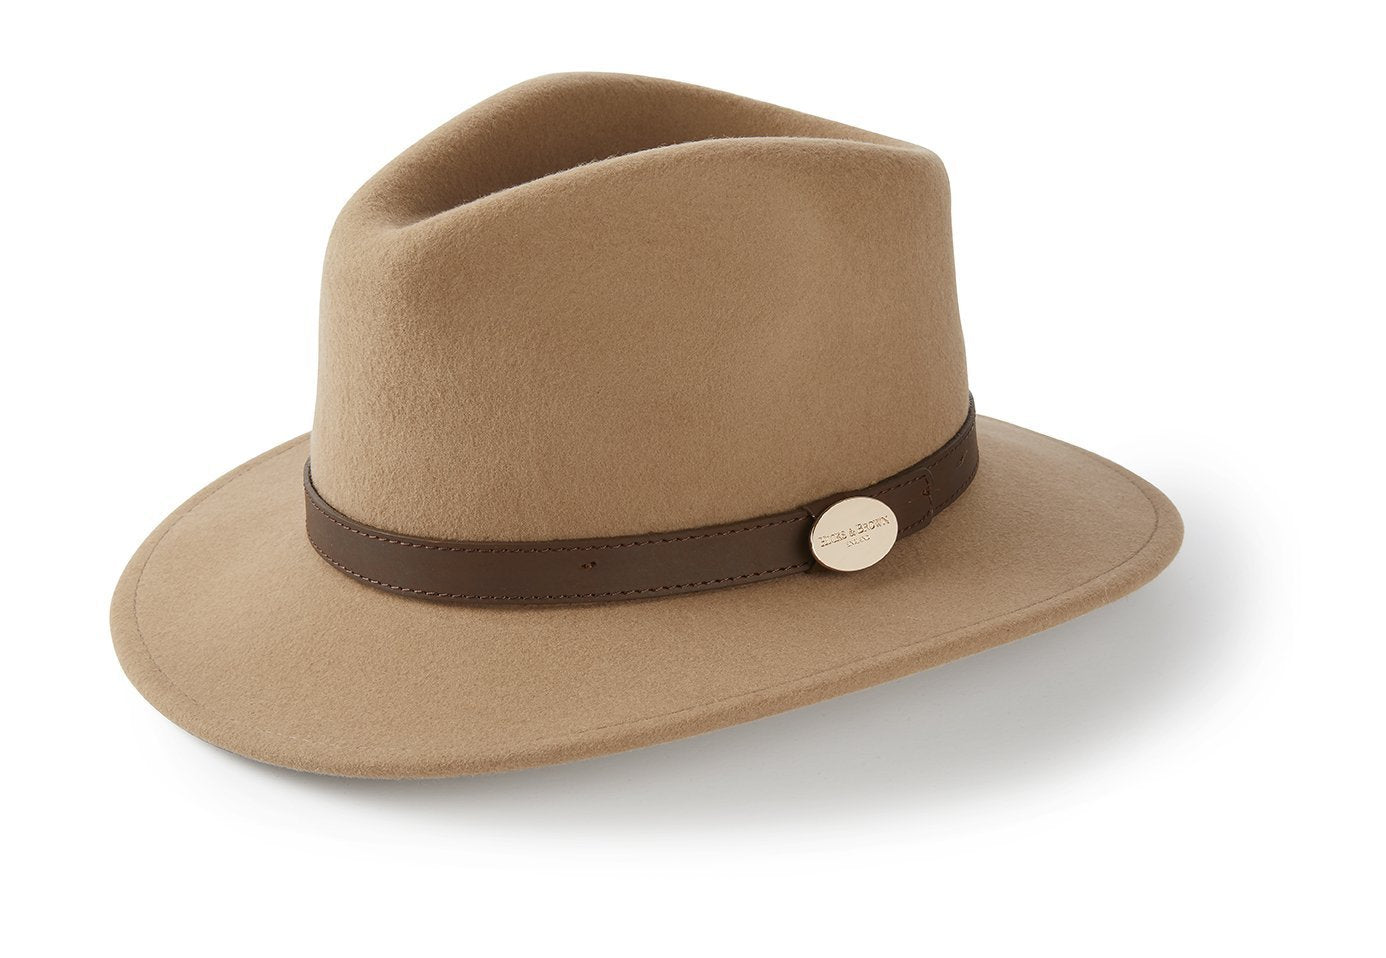 Hicks & Brown Fedora The Suffolk Fedora in Camel (No Feather)